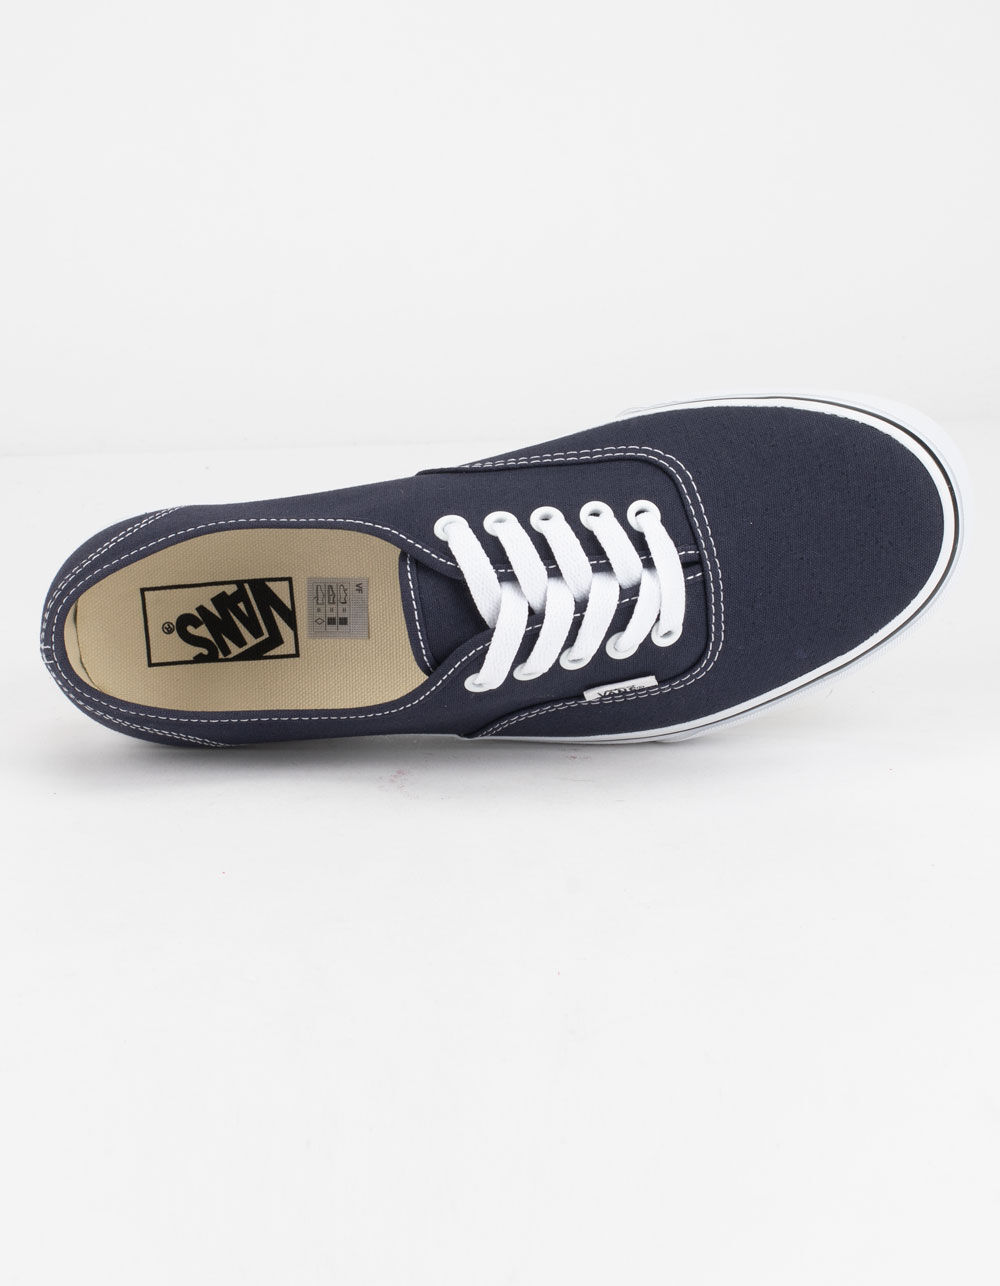 VANS Authentic Night Sky & True White Shoes image number 2